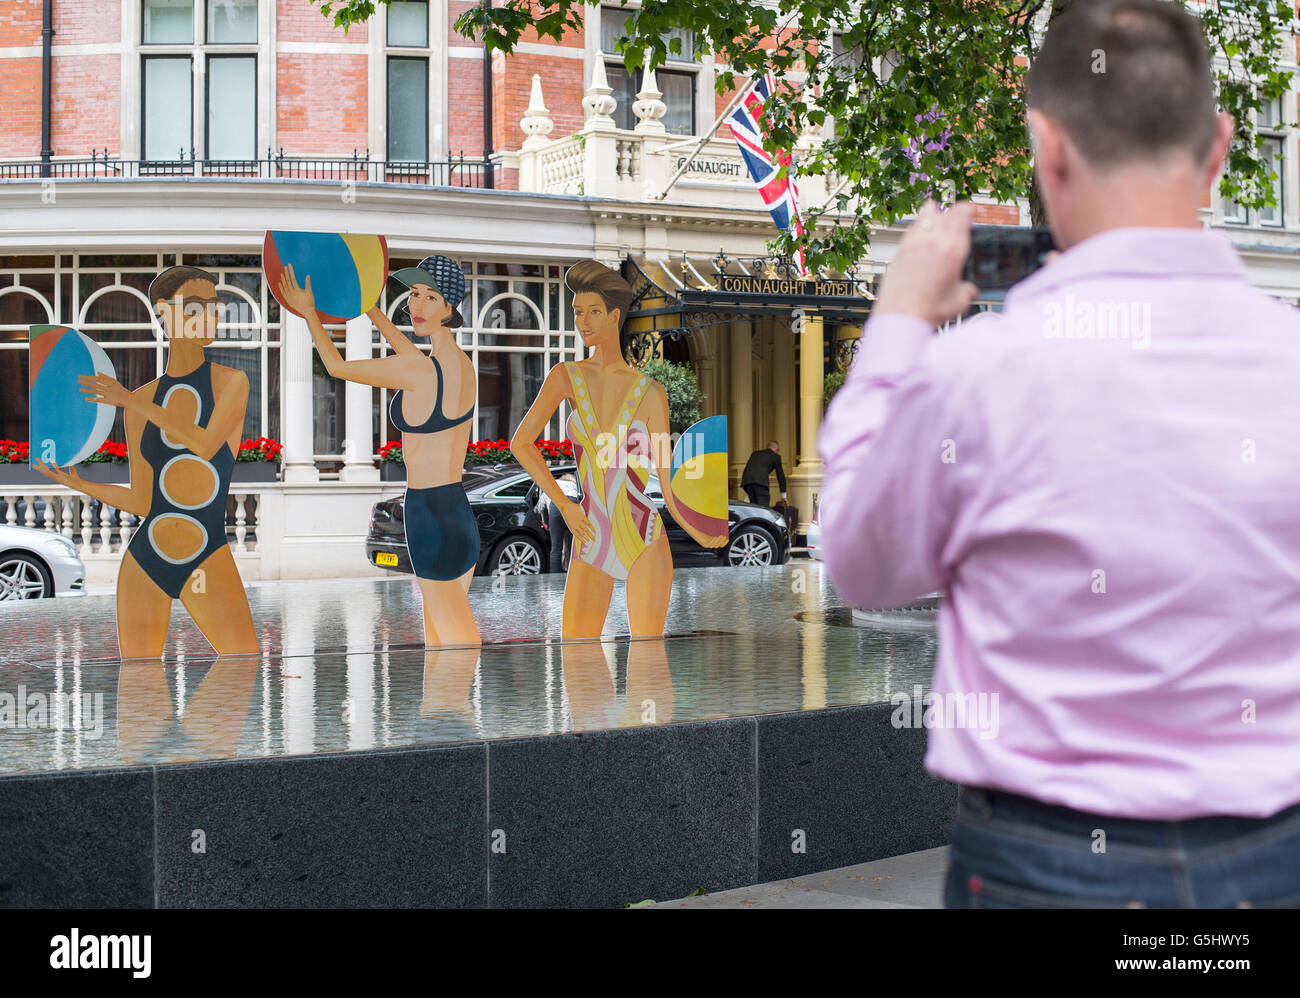 A member of the public takes a photograph of Chance, a cutout sculpture by artist Alex Katz featured inside the Tadao Ando-designed water feature outside The Connaught Hotel in London, where it will remain for the day and then be transferred to Timothy Taylor art gallery in London, where it can be seen until Saturday 3 September. Stock Photo